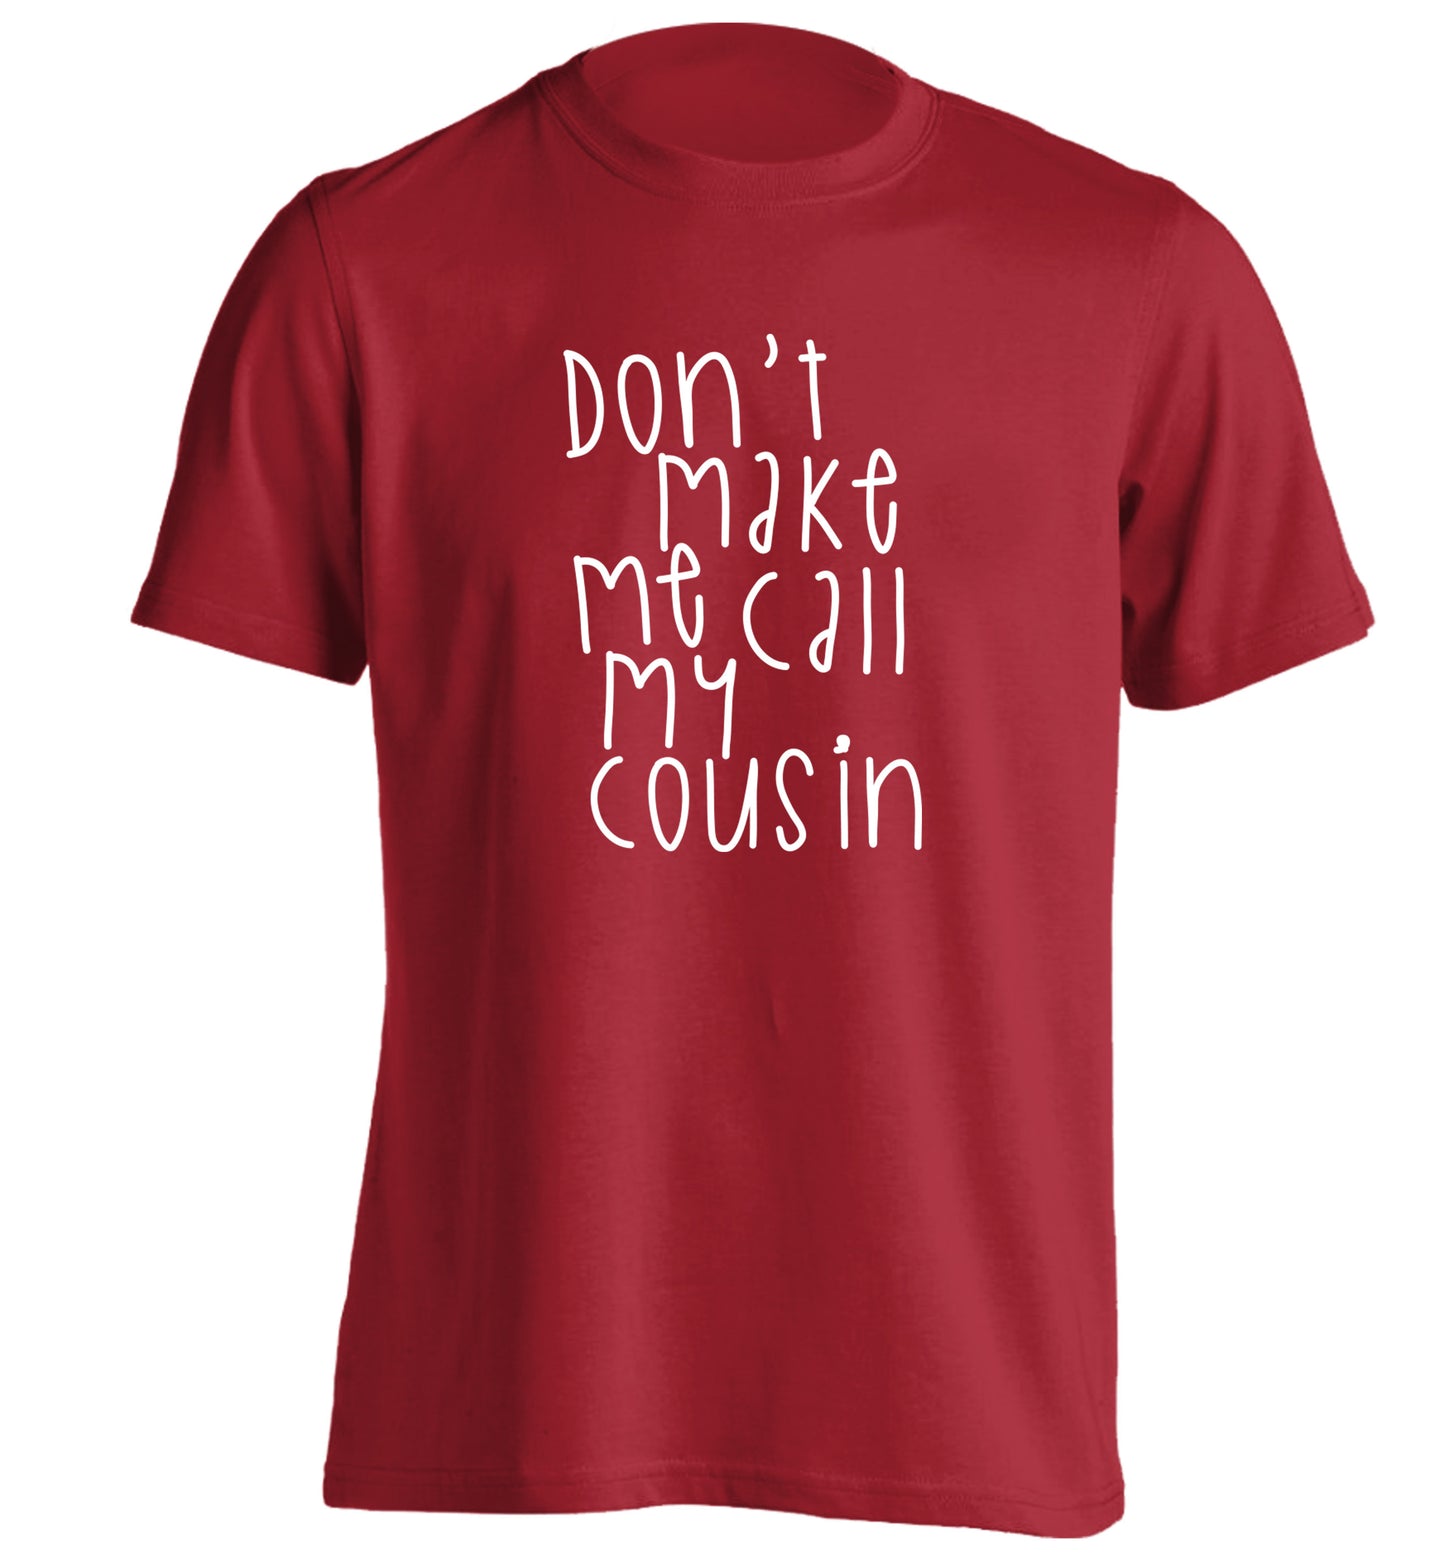 Don't make me call my cousin adults unisex red Tshirt 2XL